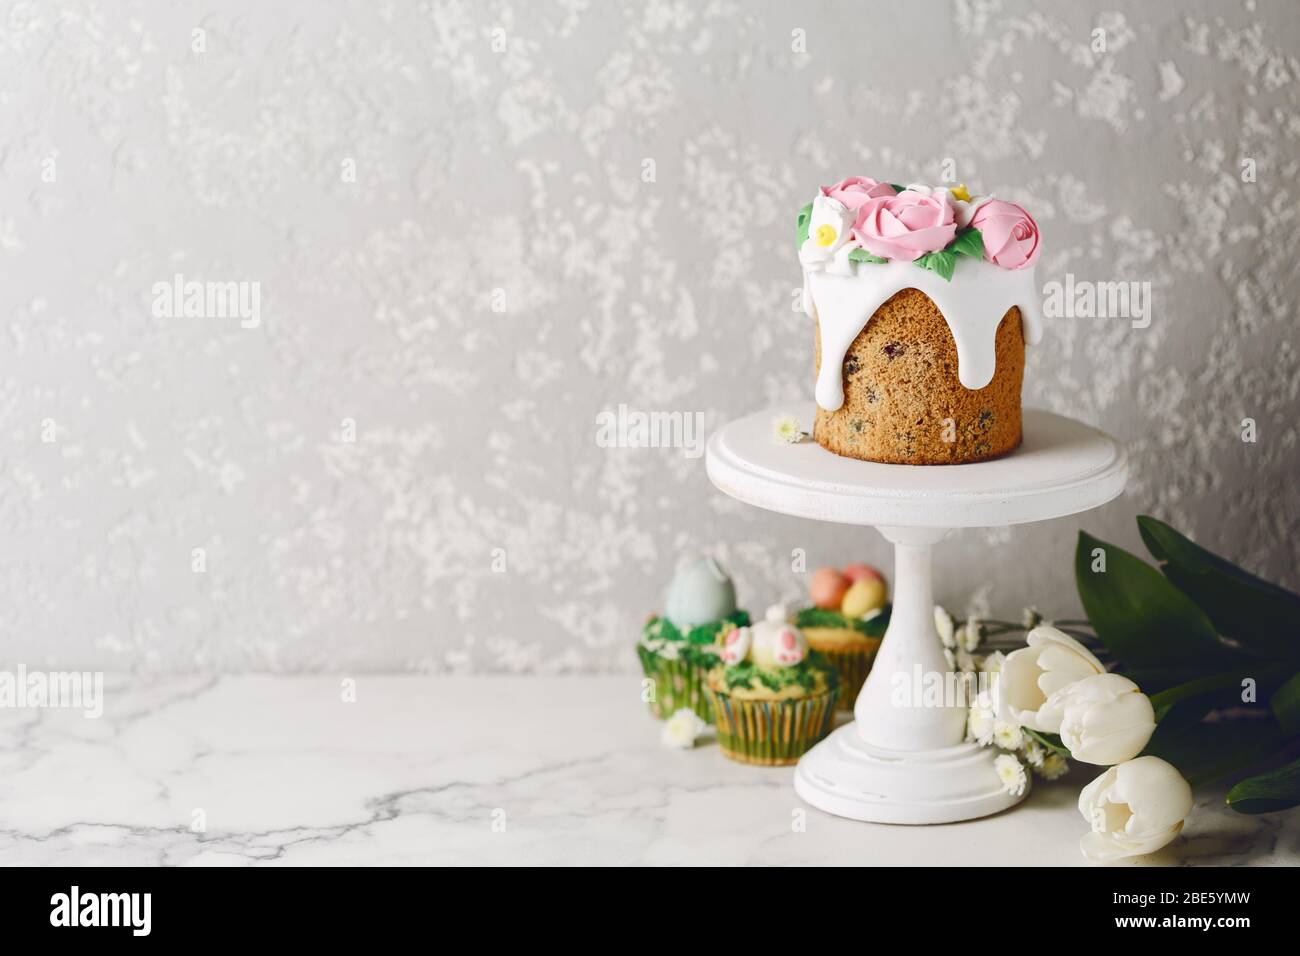 Easter cake with creamy roses on white stand. White flowers with holiday cupcakes. Cement wall. Copy space Stock Photo